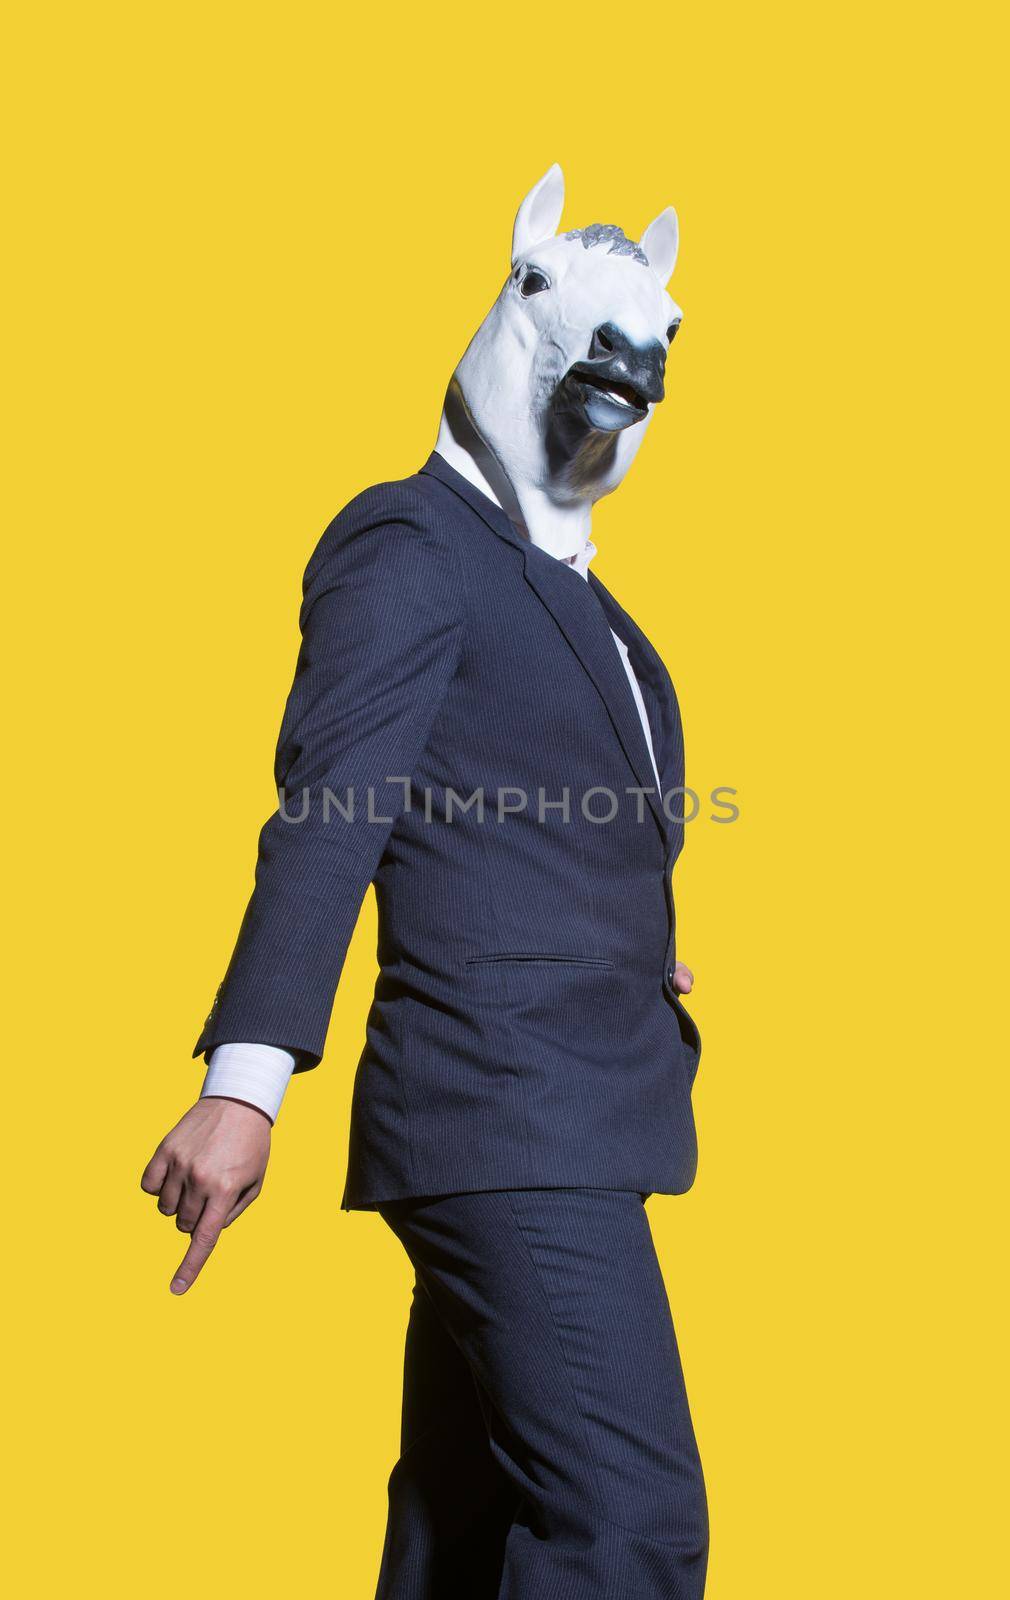 A vertical shot of a creative man in a costume with a white horse mask posing on a yellow background wall.